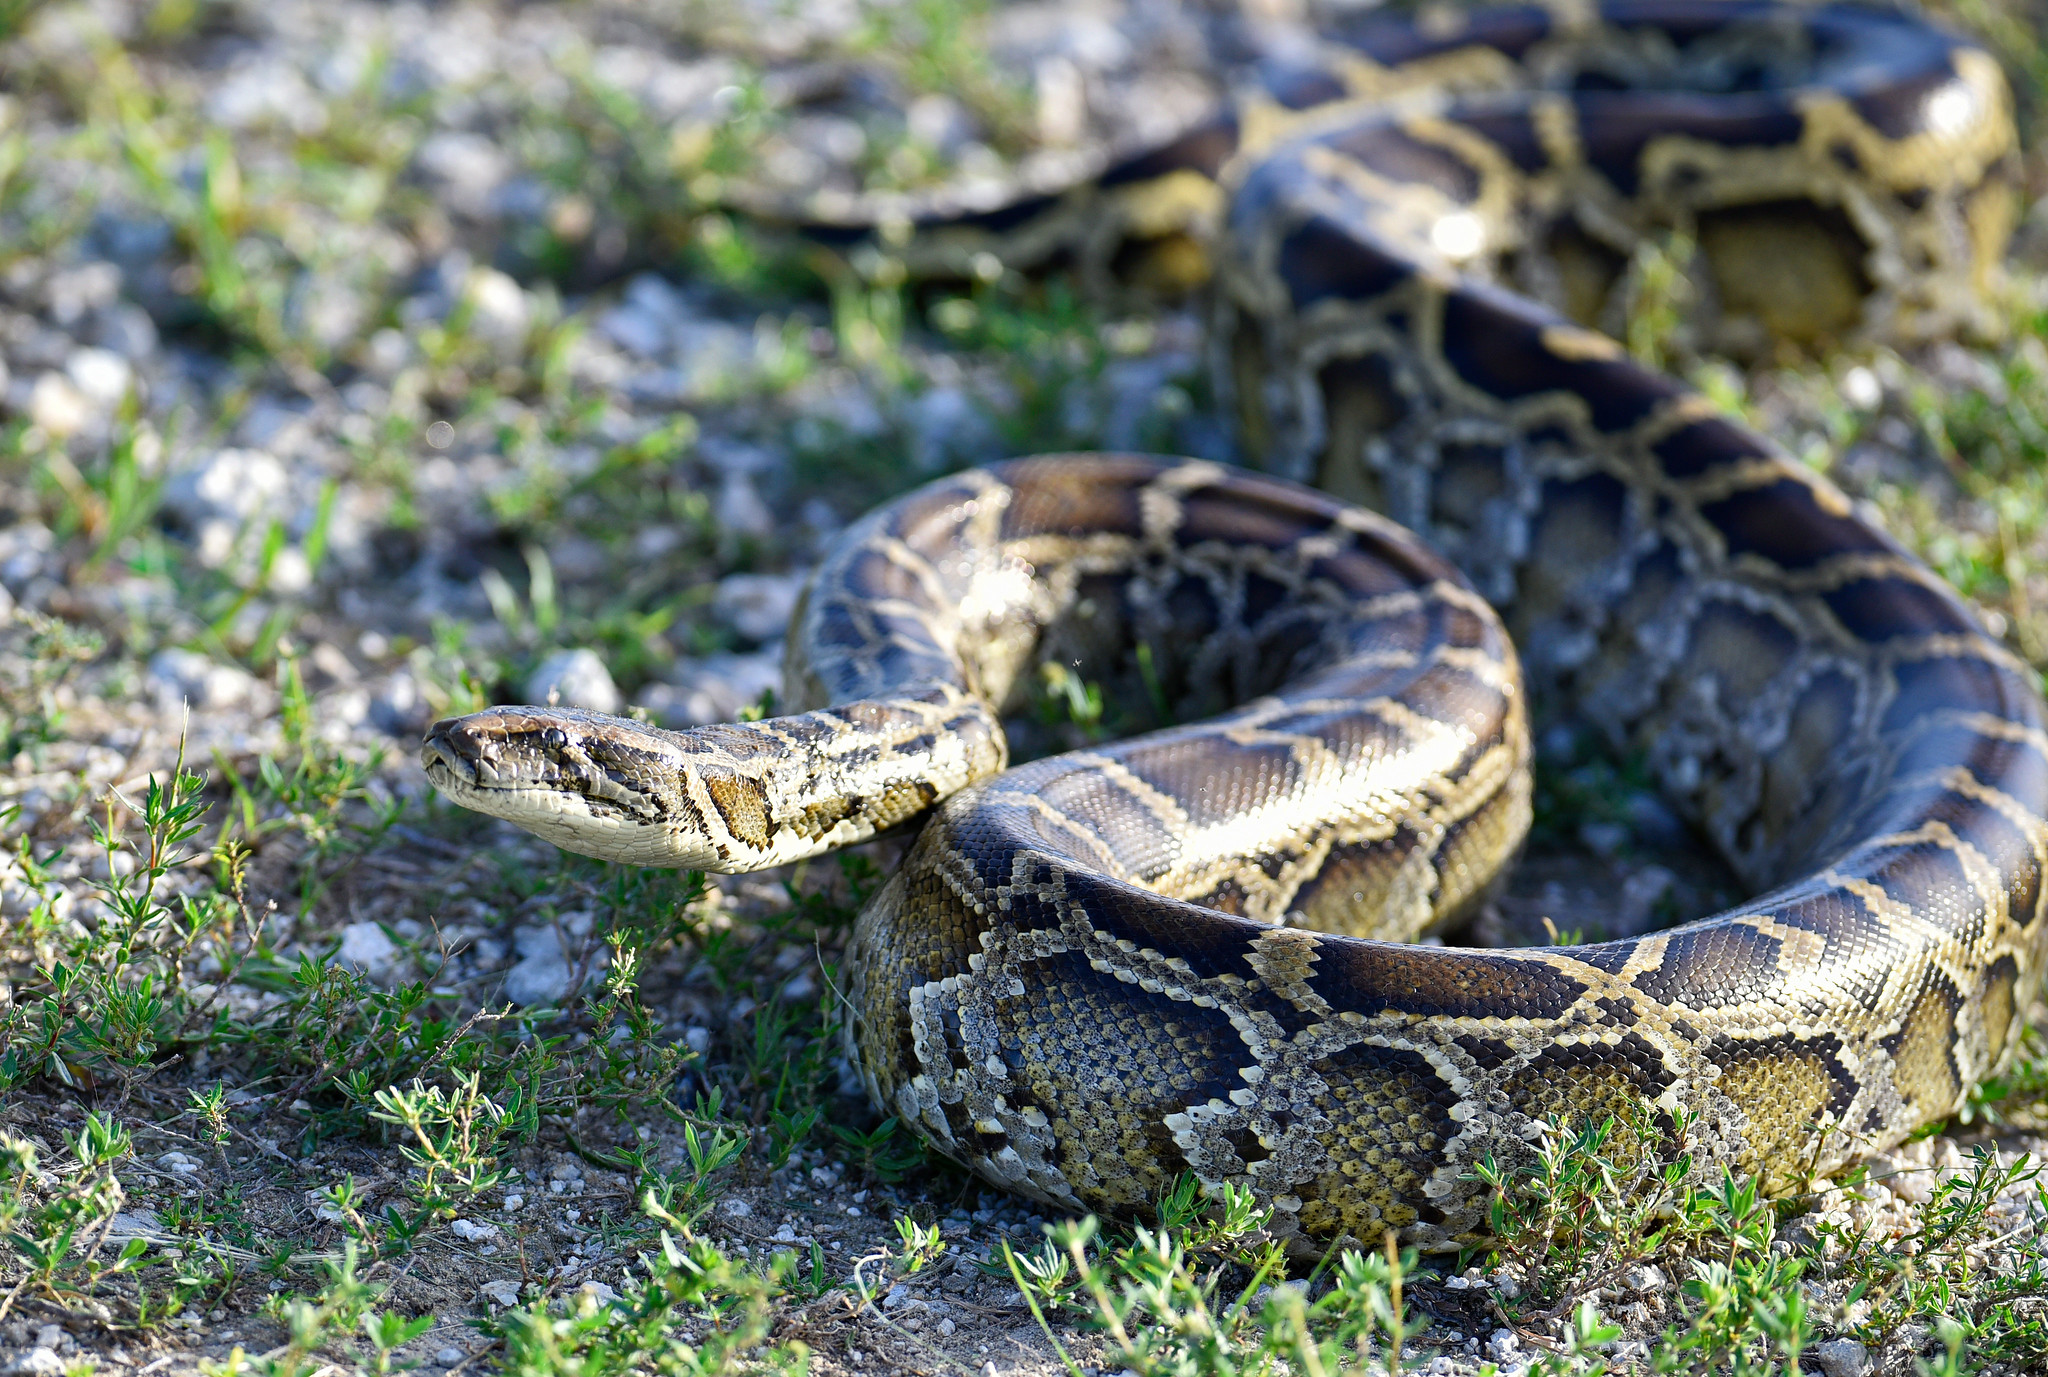 Why is the Burmese Python a Problem in Florida?